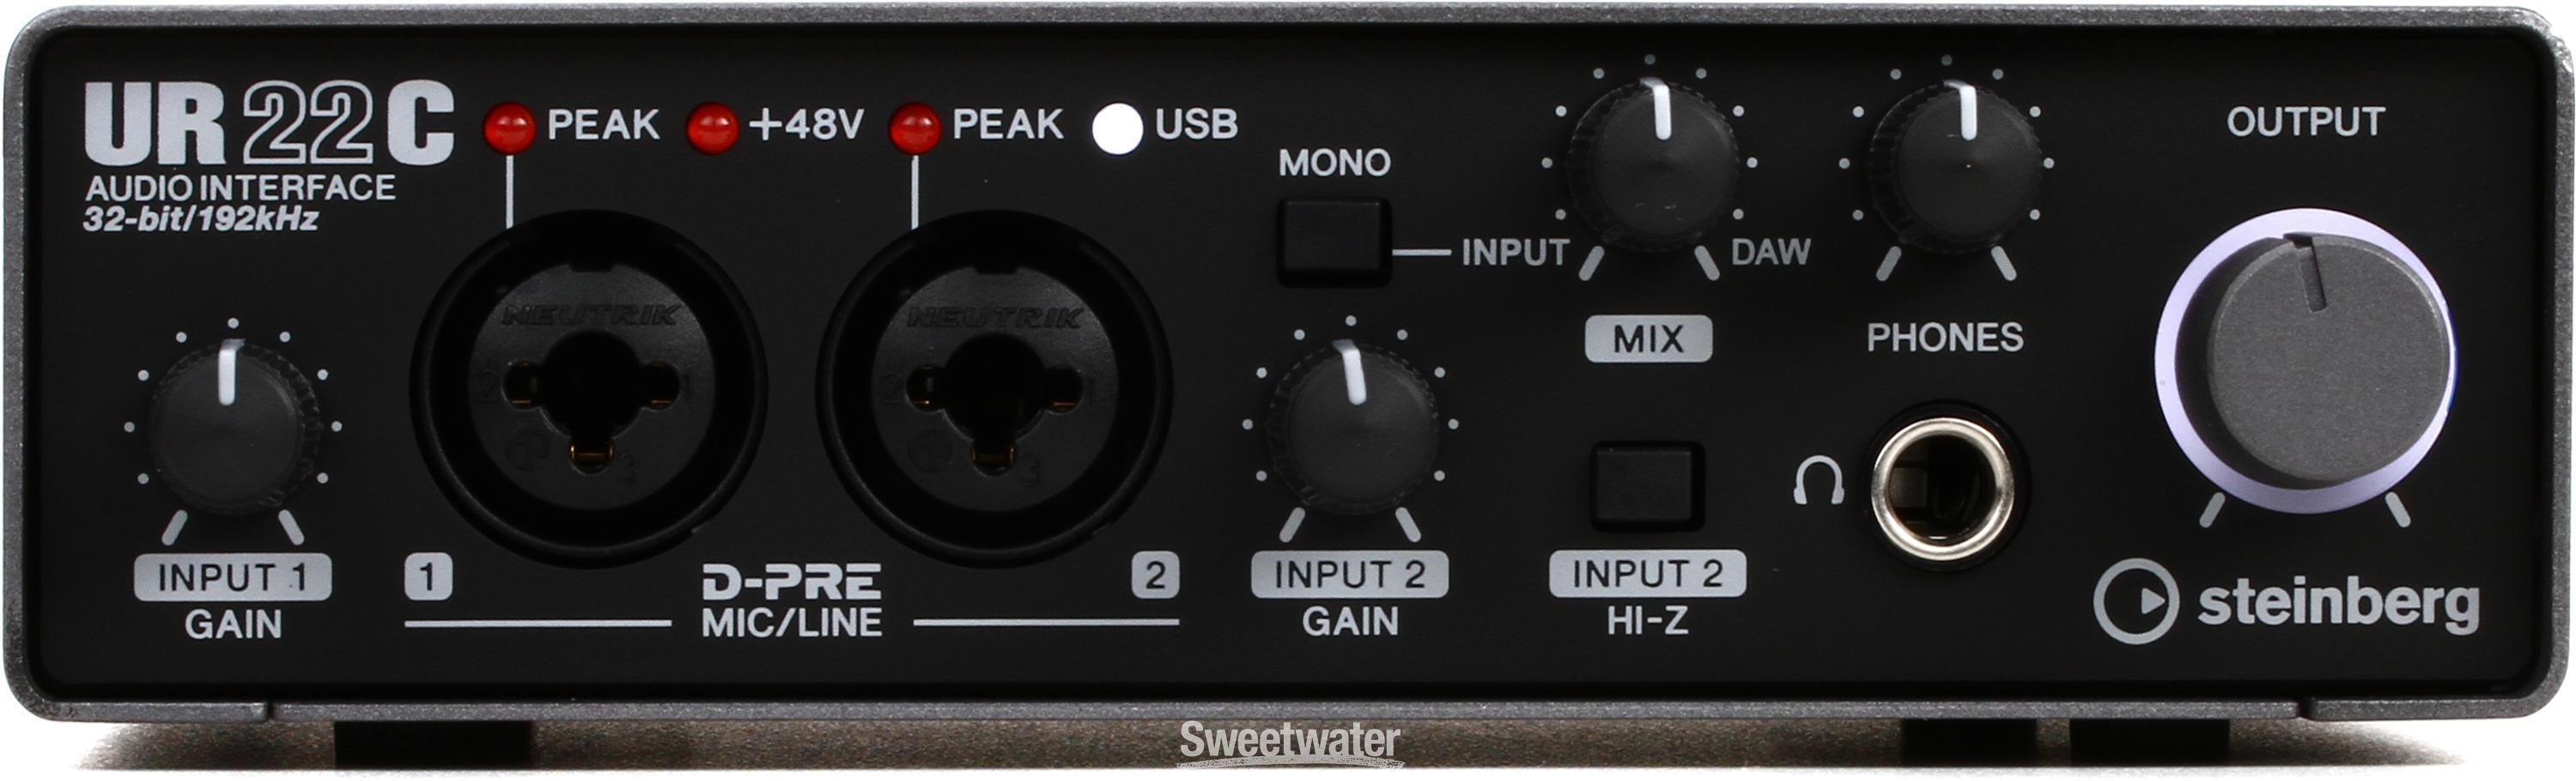 Steinberg UR22C Recording Pack with USB 3.1 Audio Interface